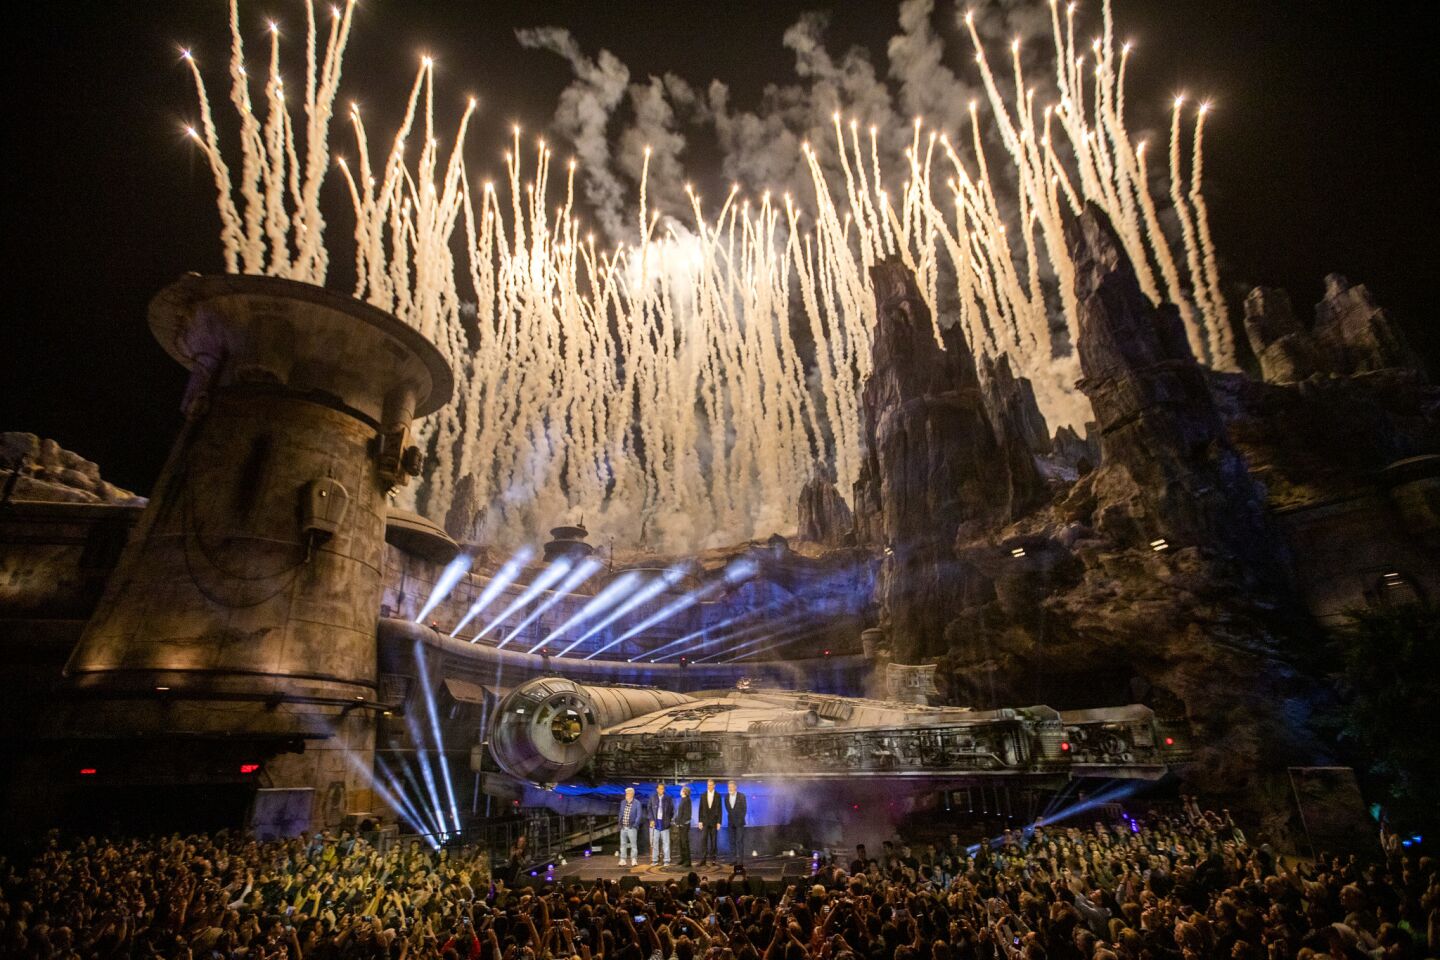 Fireworks explode over the the Millennium Falcon during the Star Wars: Galaxy's Edge unveiling event at the Disneyland Resort.